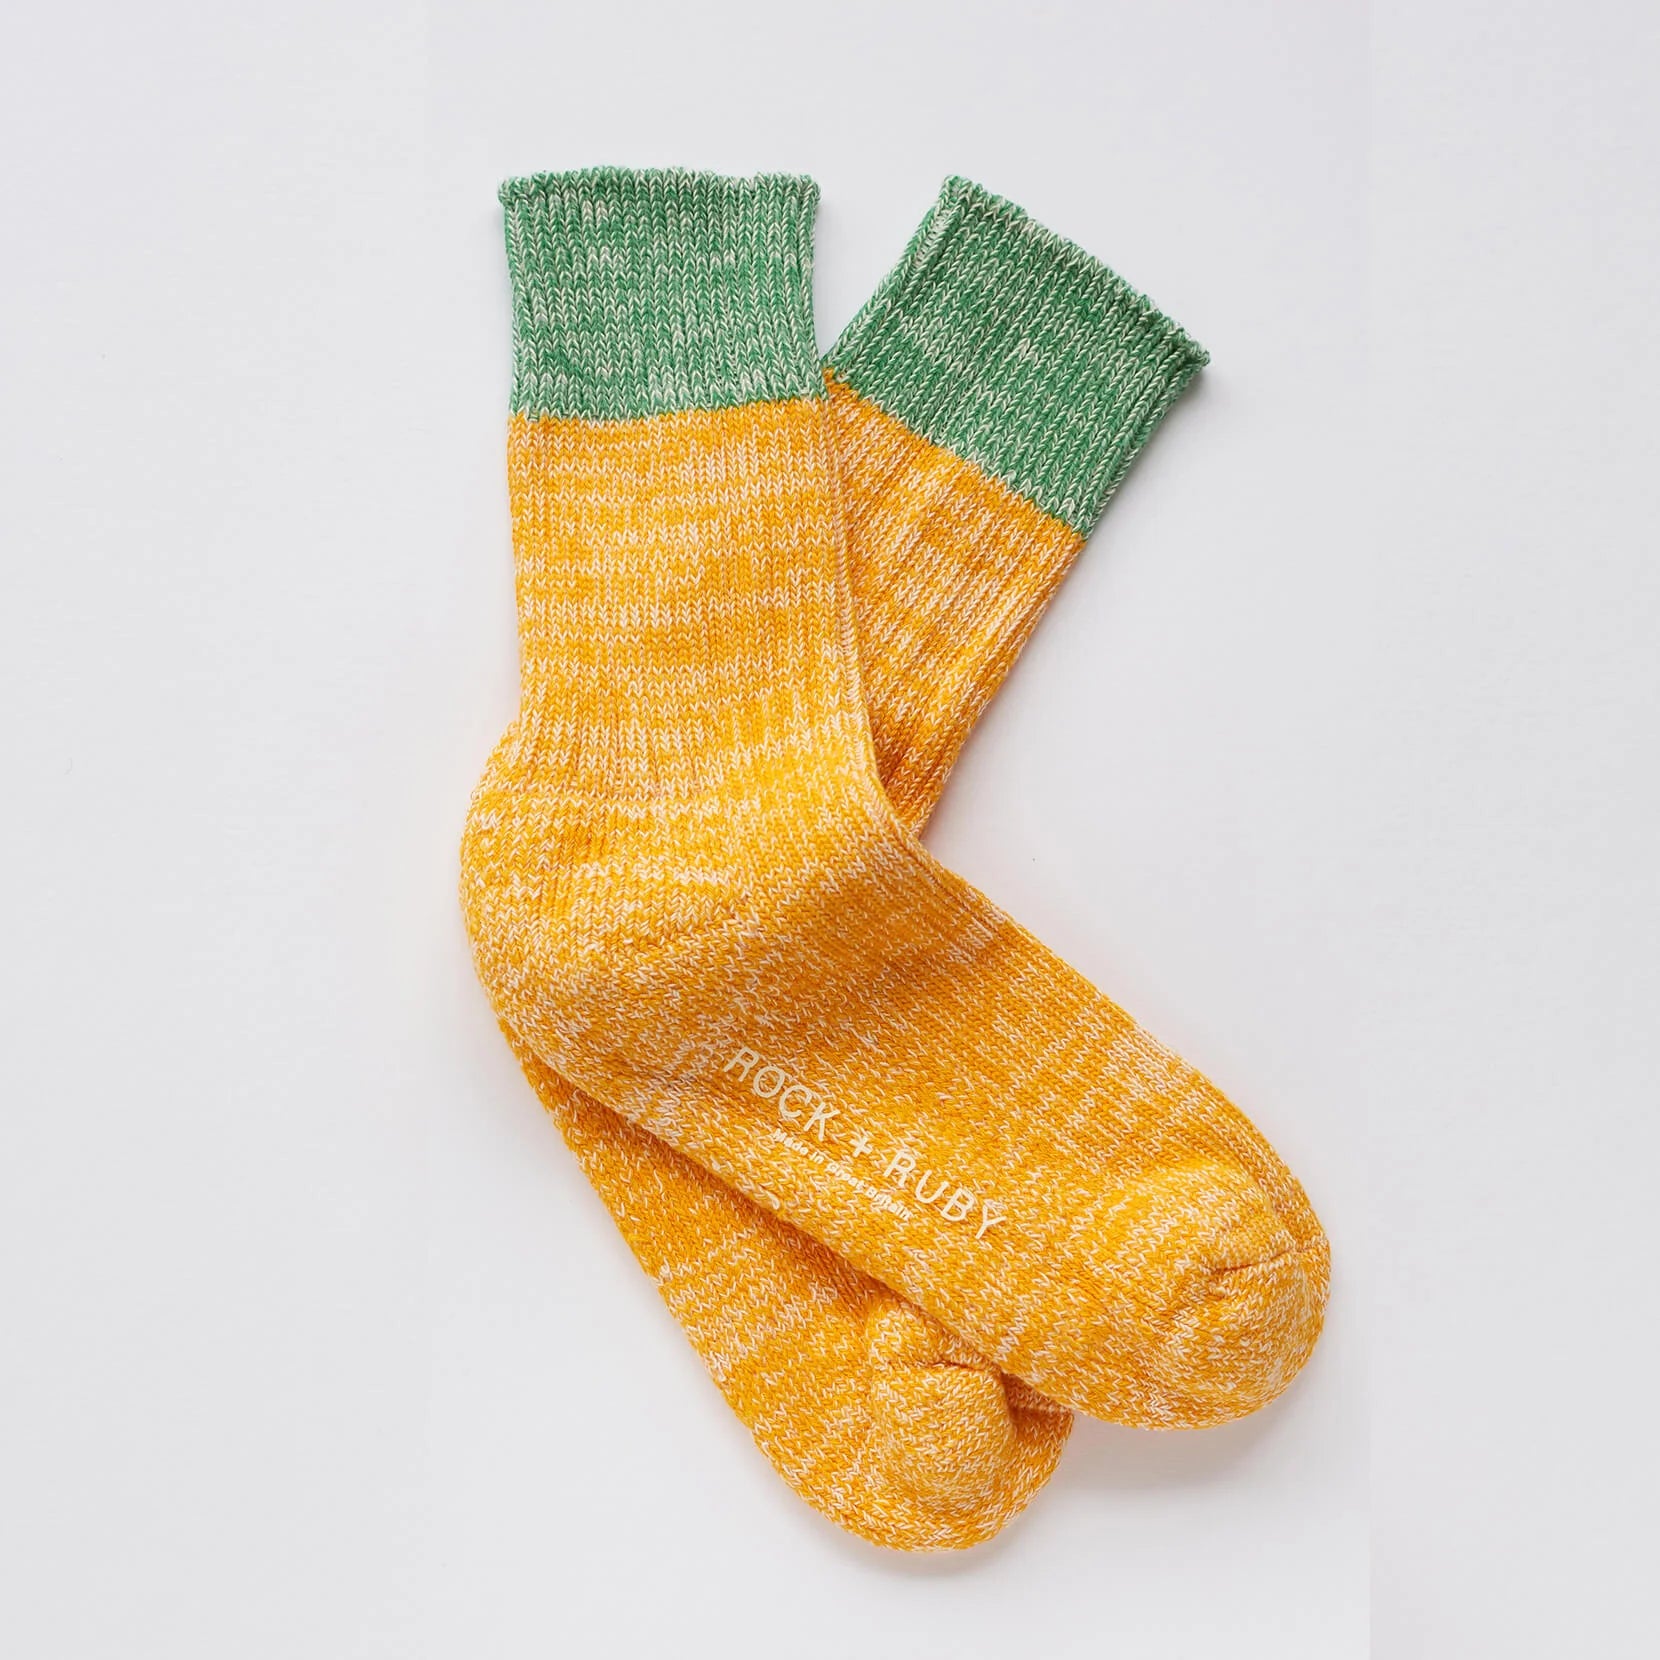 The Every Space Elsie cotton socks in sunny yellow by Rock and Ruby